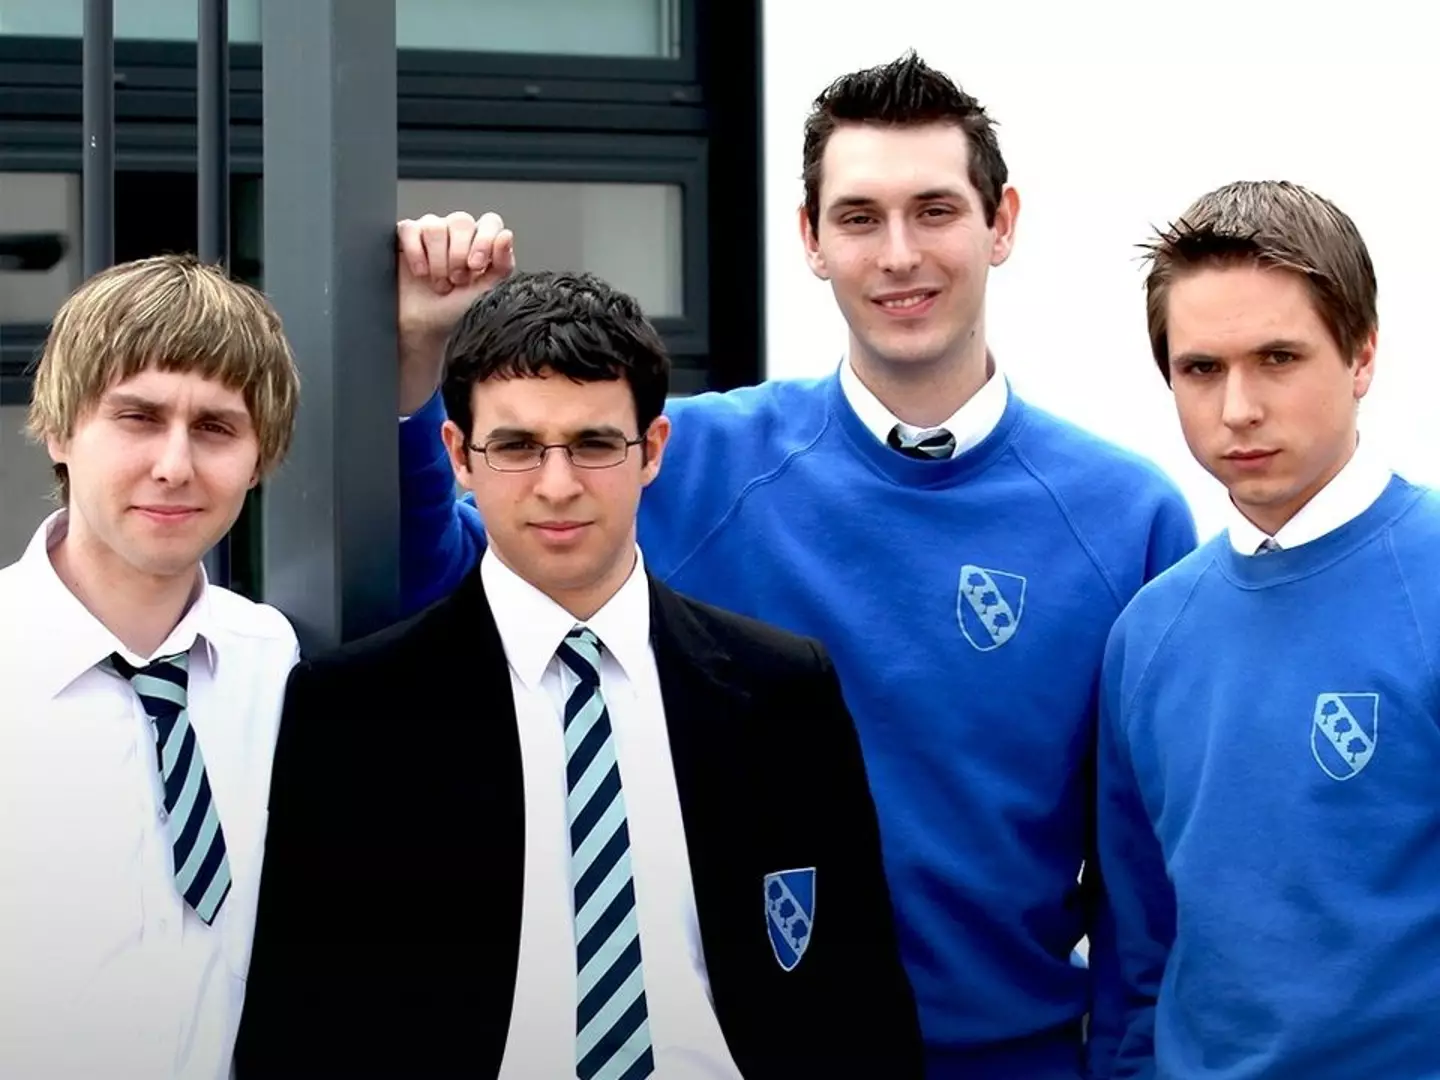 The main cast of The Inbetweeners.